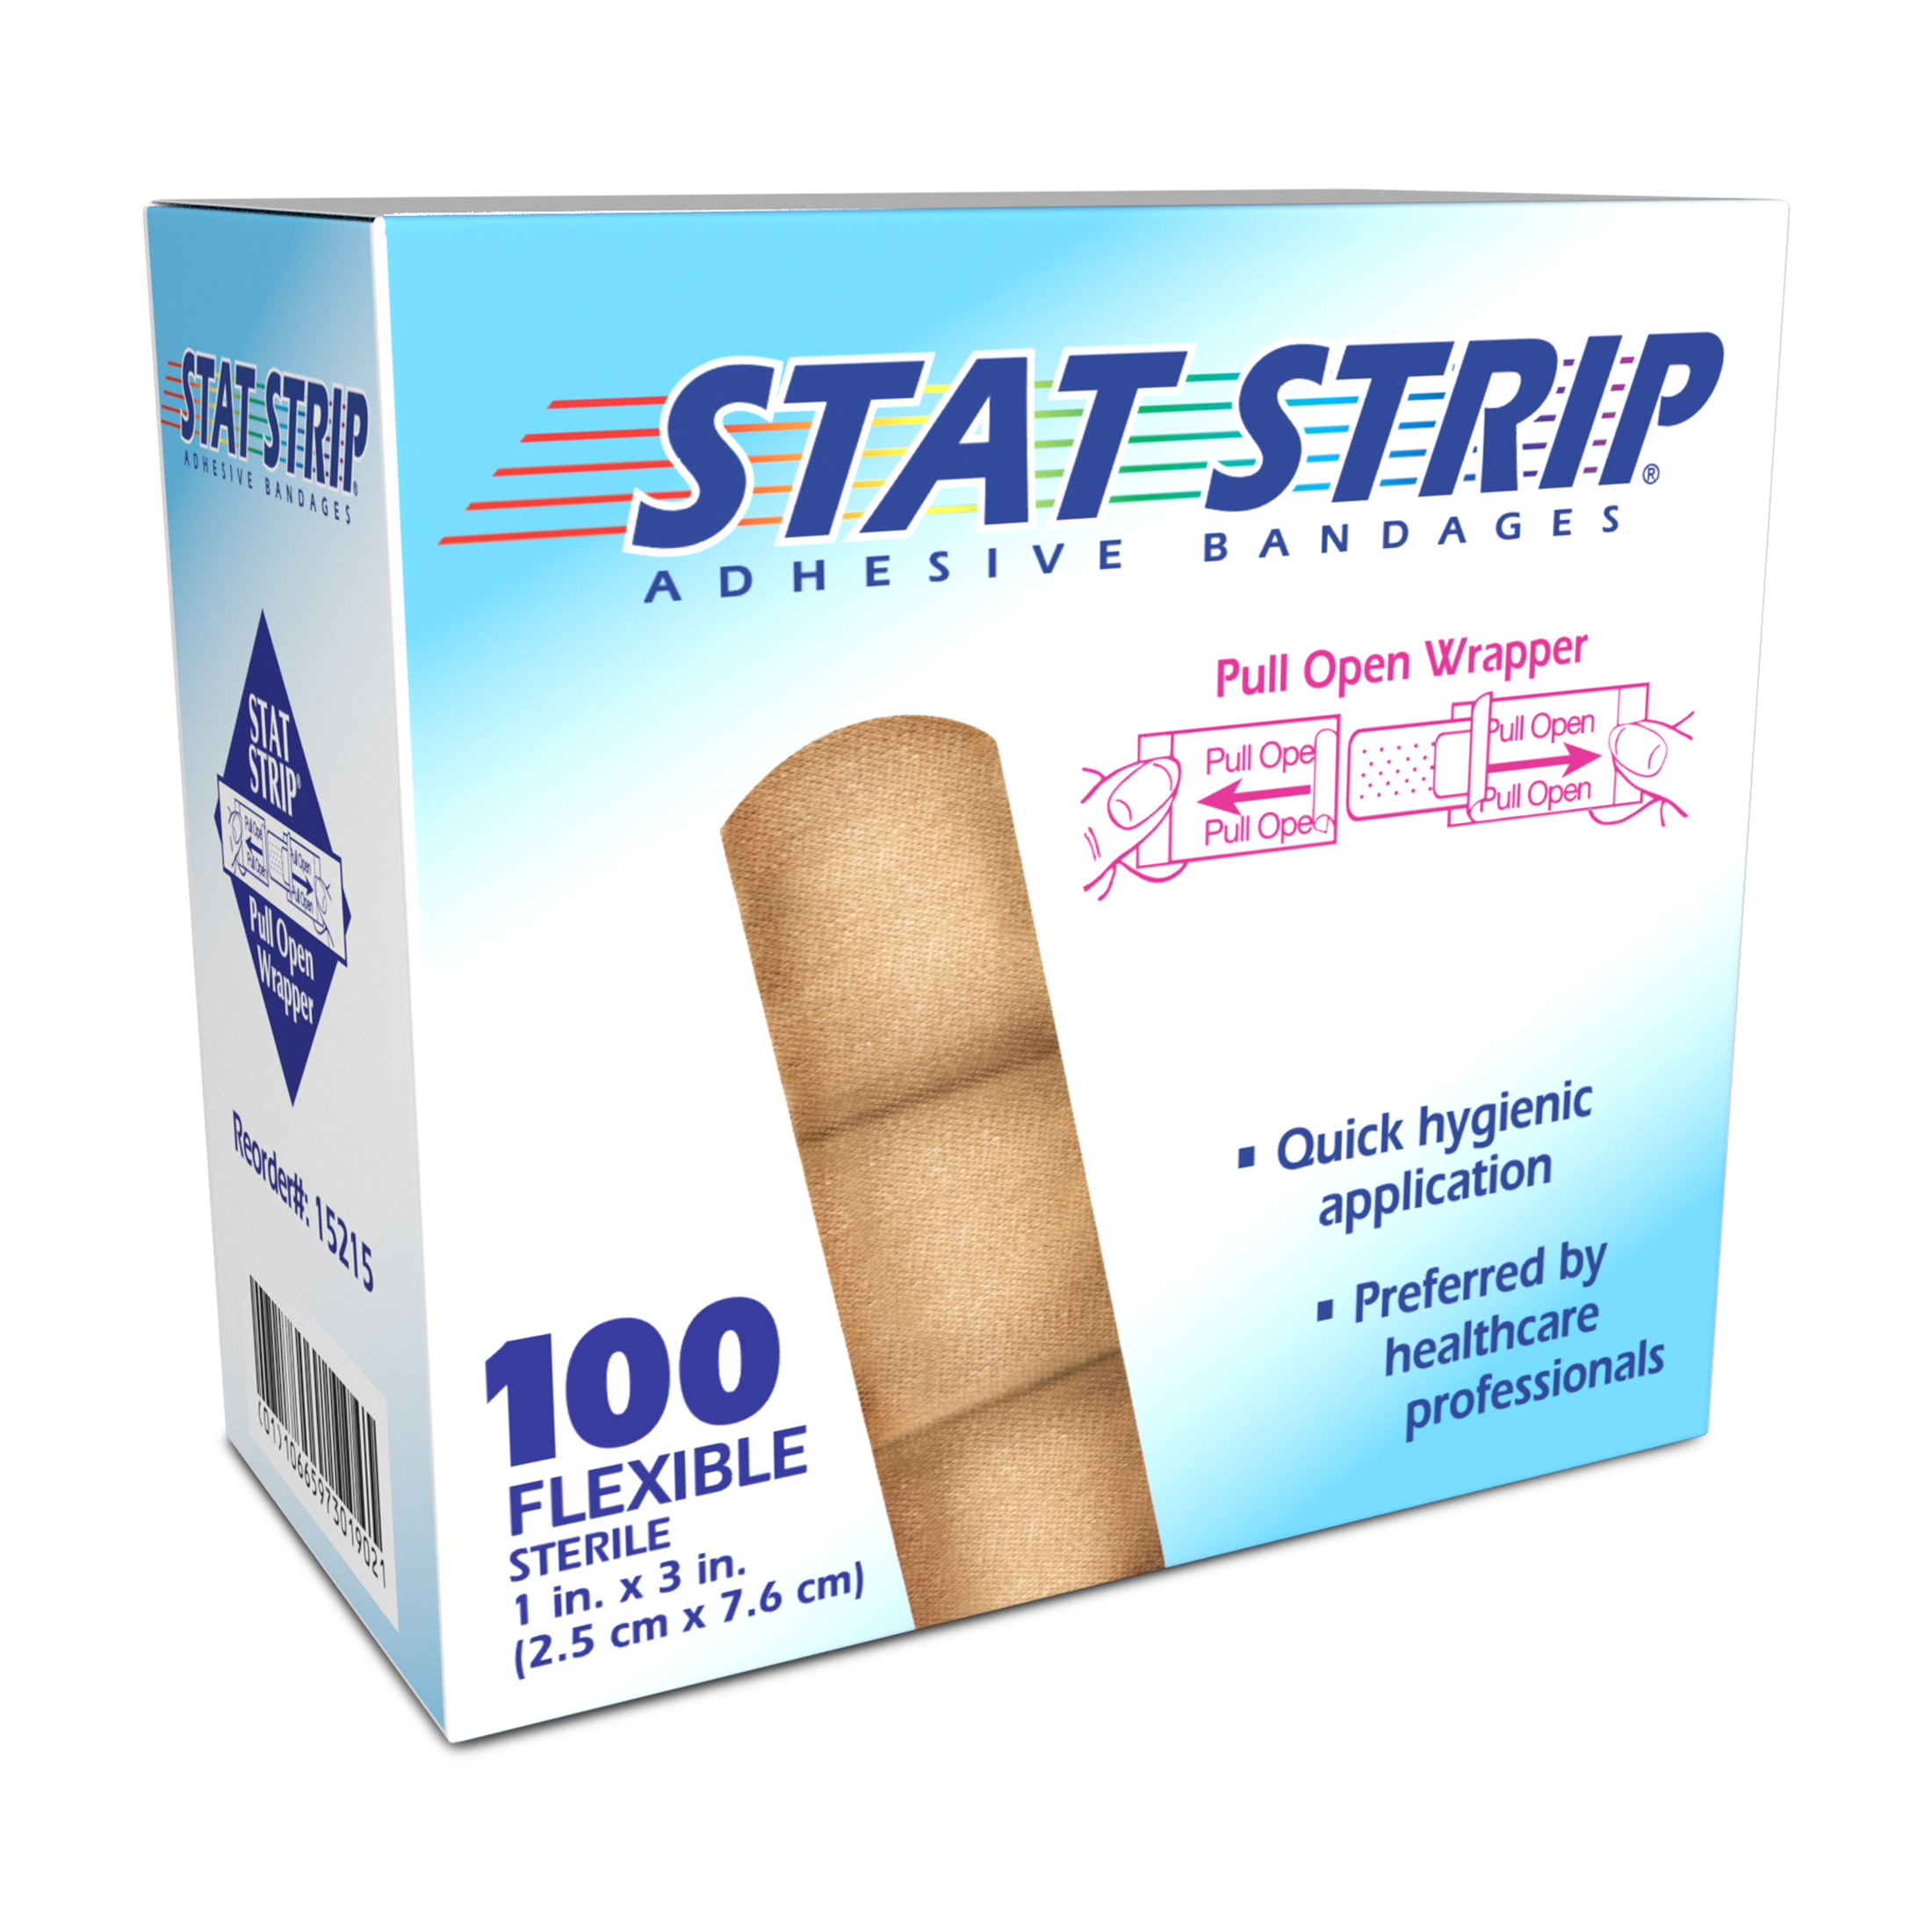 American White Cross Lightweight Flex Stat Strip Adhesive Bandages 1 x 3  $51.28/Case of 1200 Dukal 15215